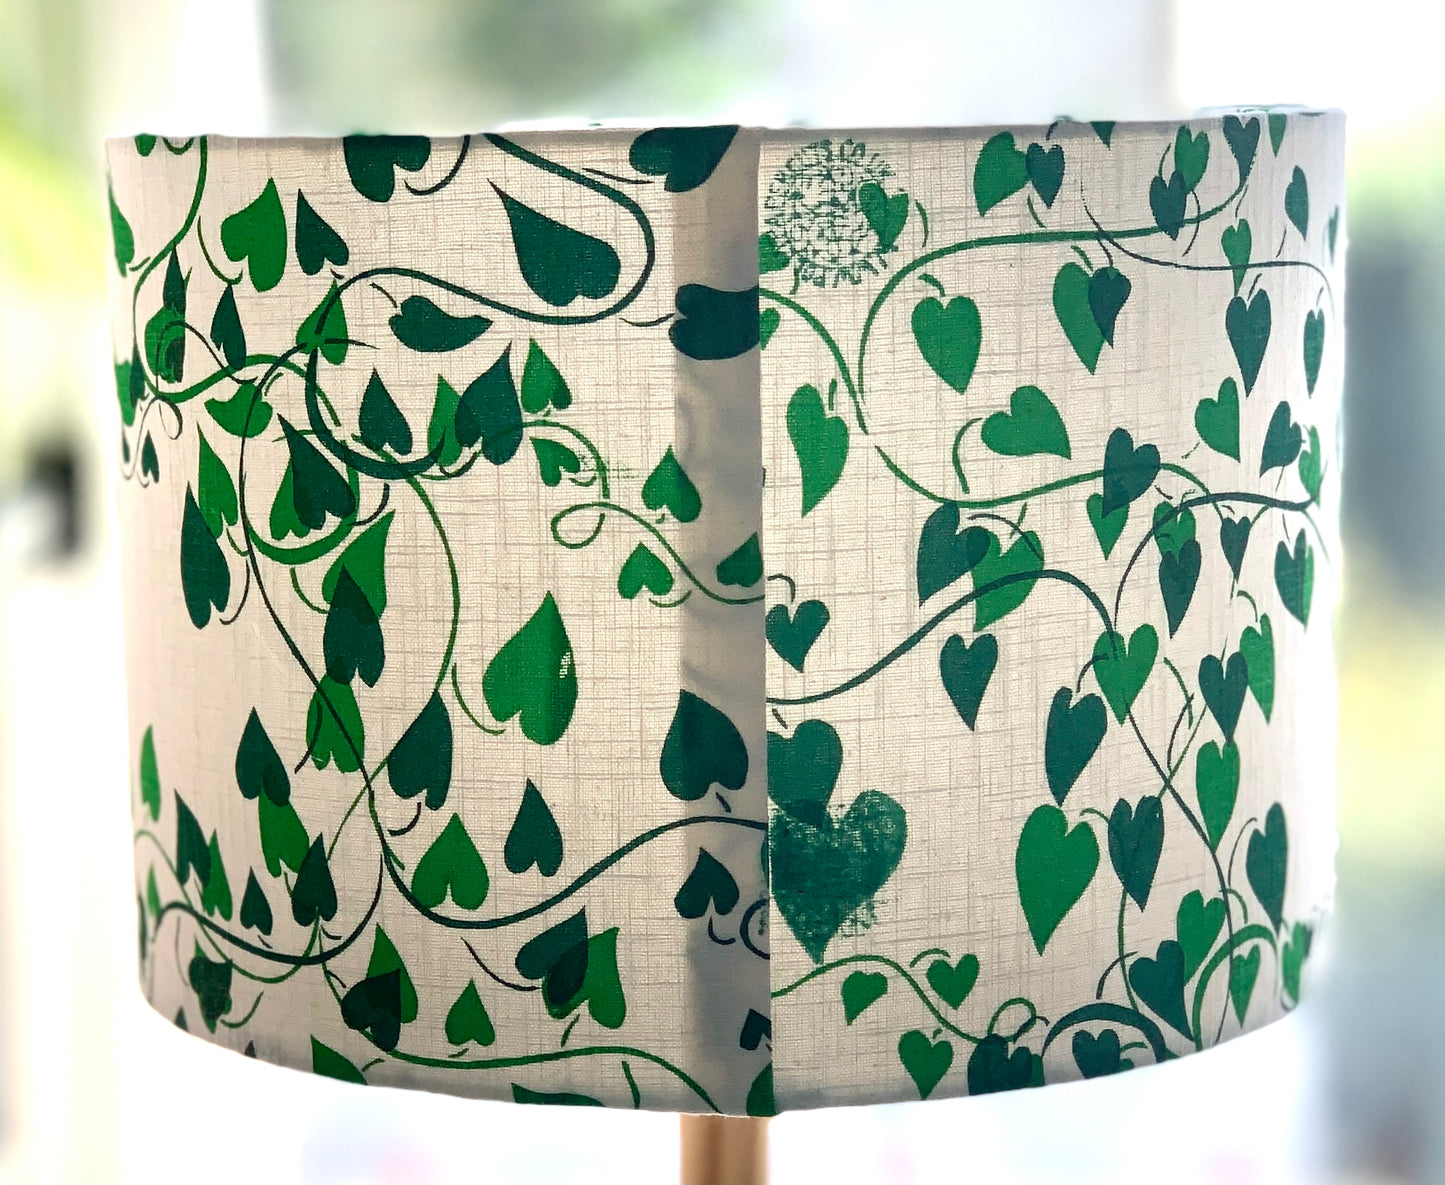 Shades of green on white fabric  handprinted lampshade in  a convolvulus design.